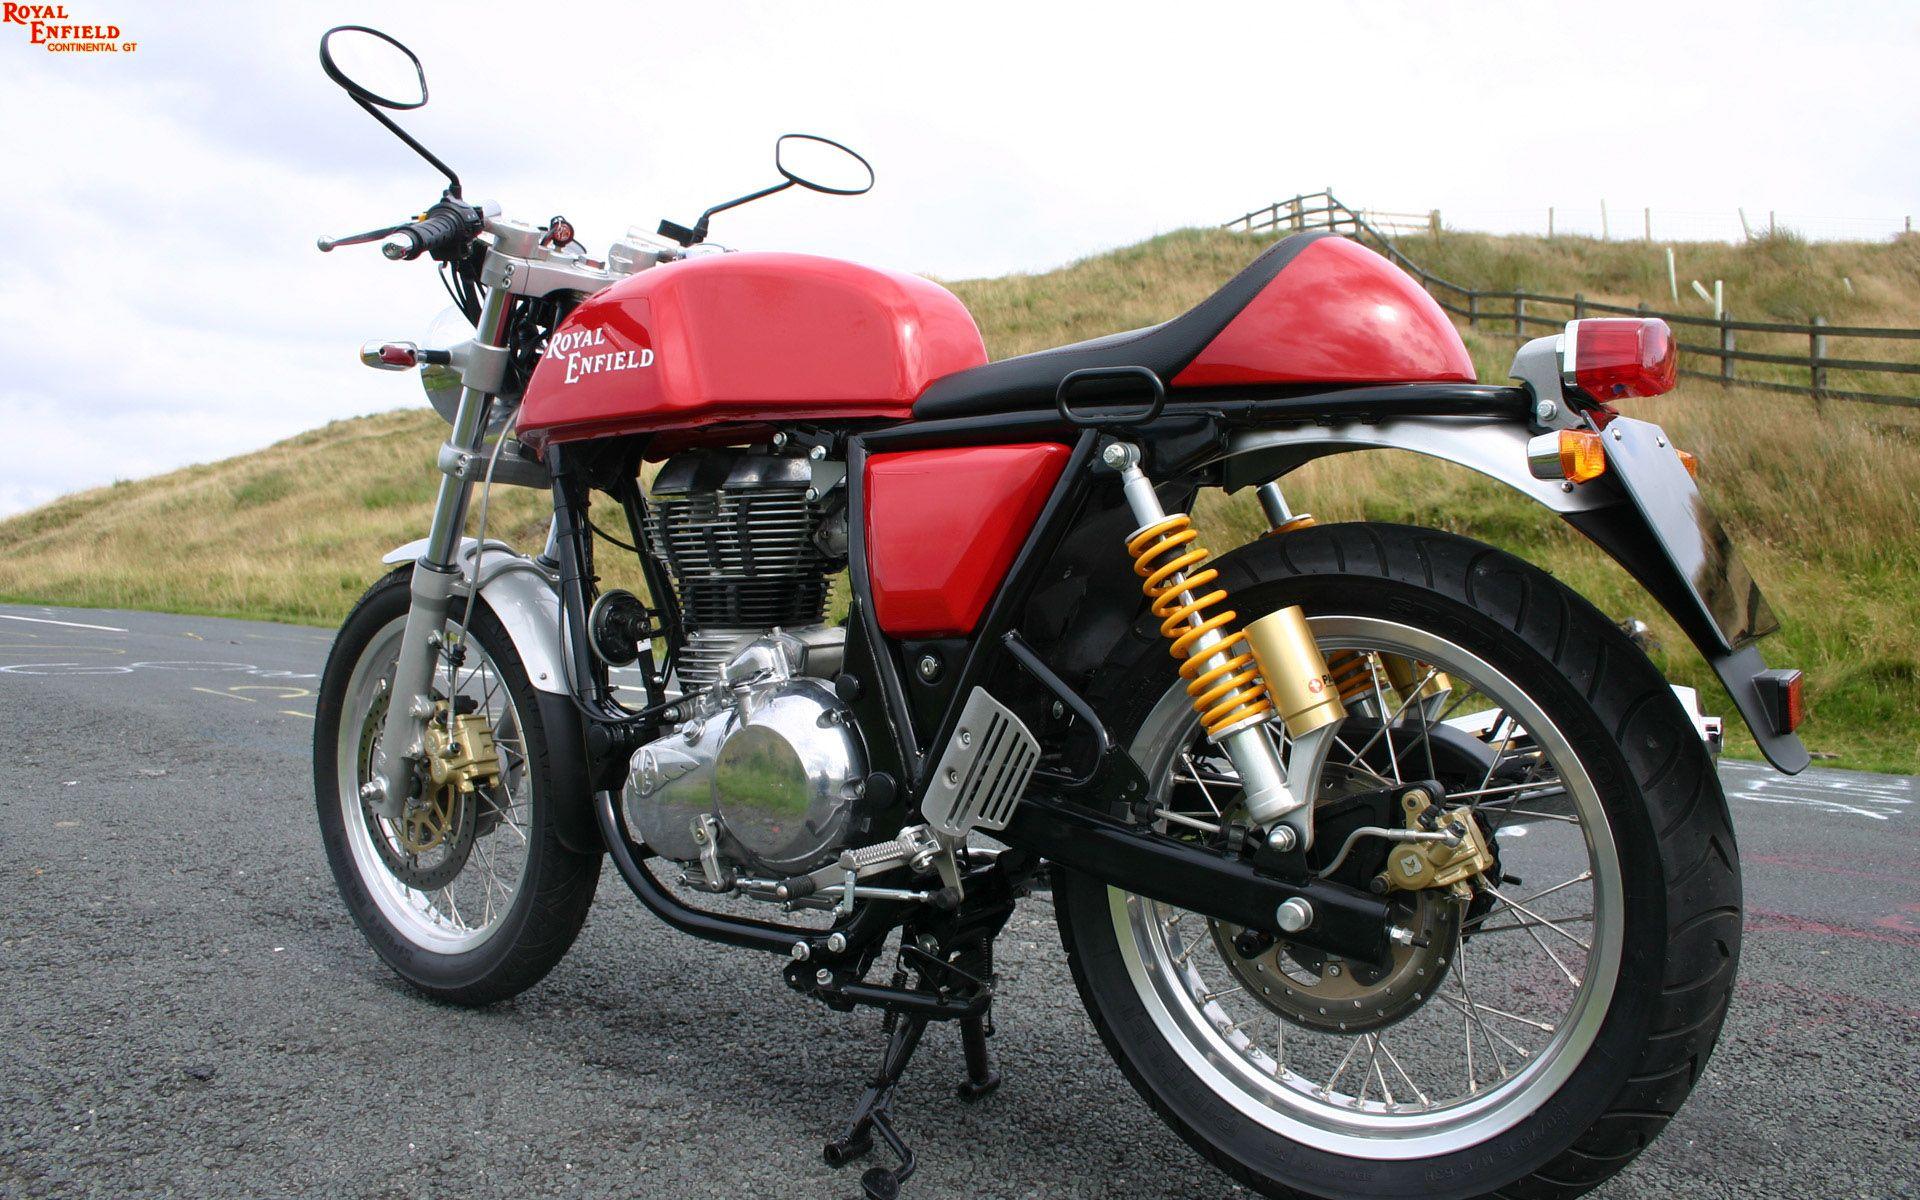 Royal Enfield Continental GT Pics For Free Download. Royal